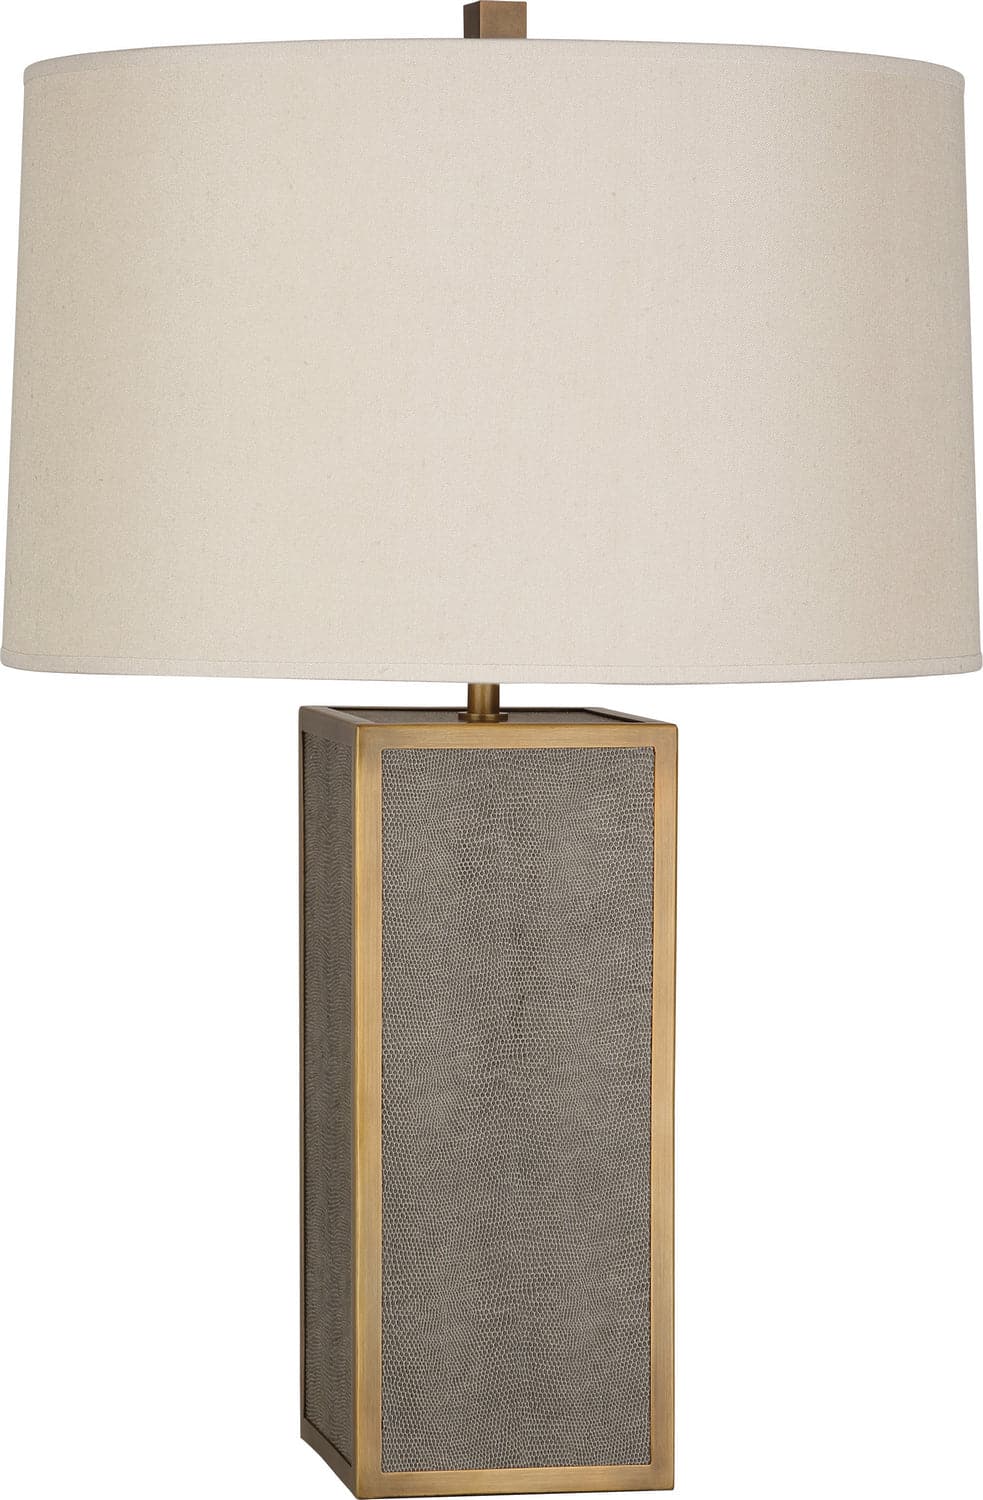 Robert Abbey - 898 - One Light Table Lamp - Anna - Faux Brown Snakeskin Wrapped Base w/Aged Brass